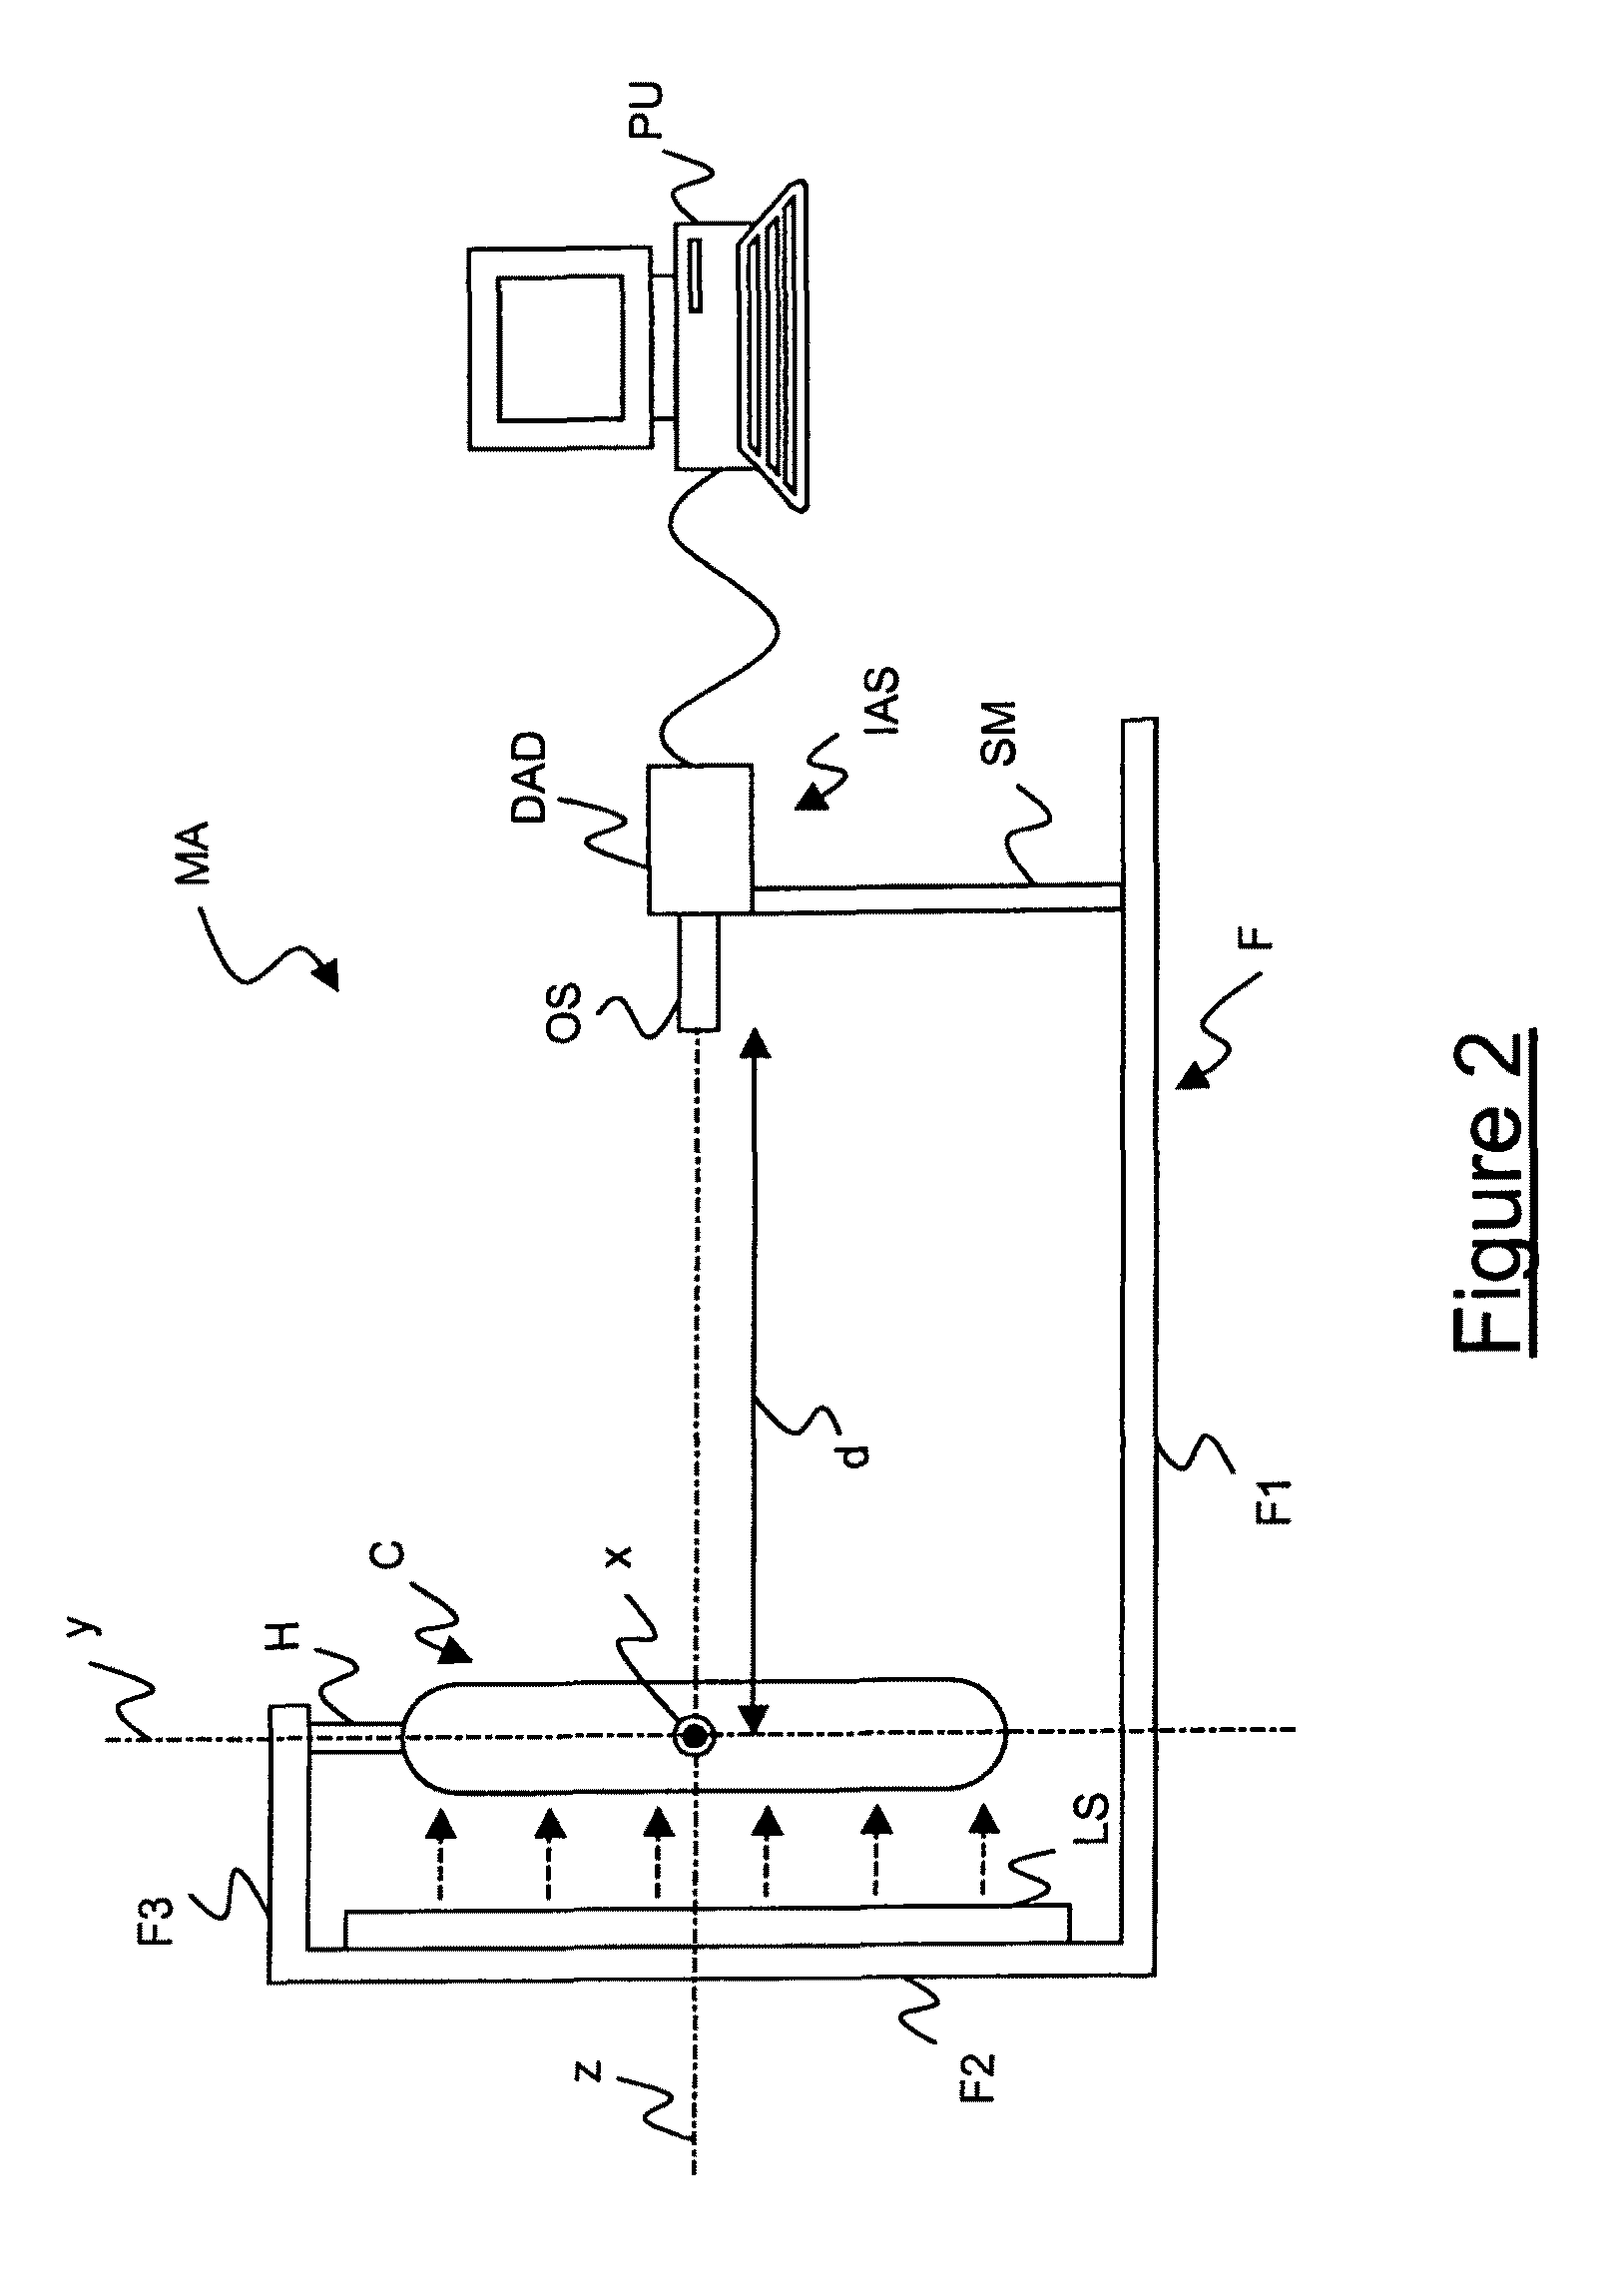 Process for manufacturing a low-attenuation optical fiber